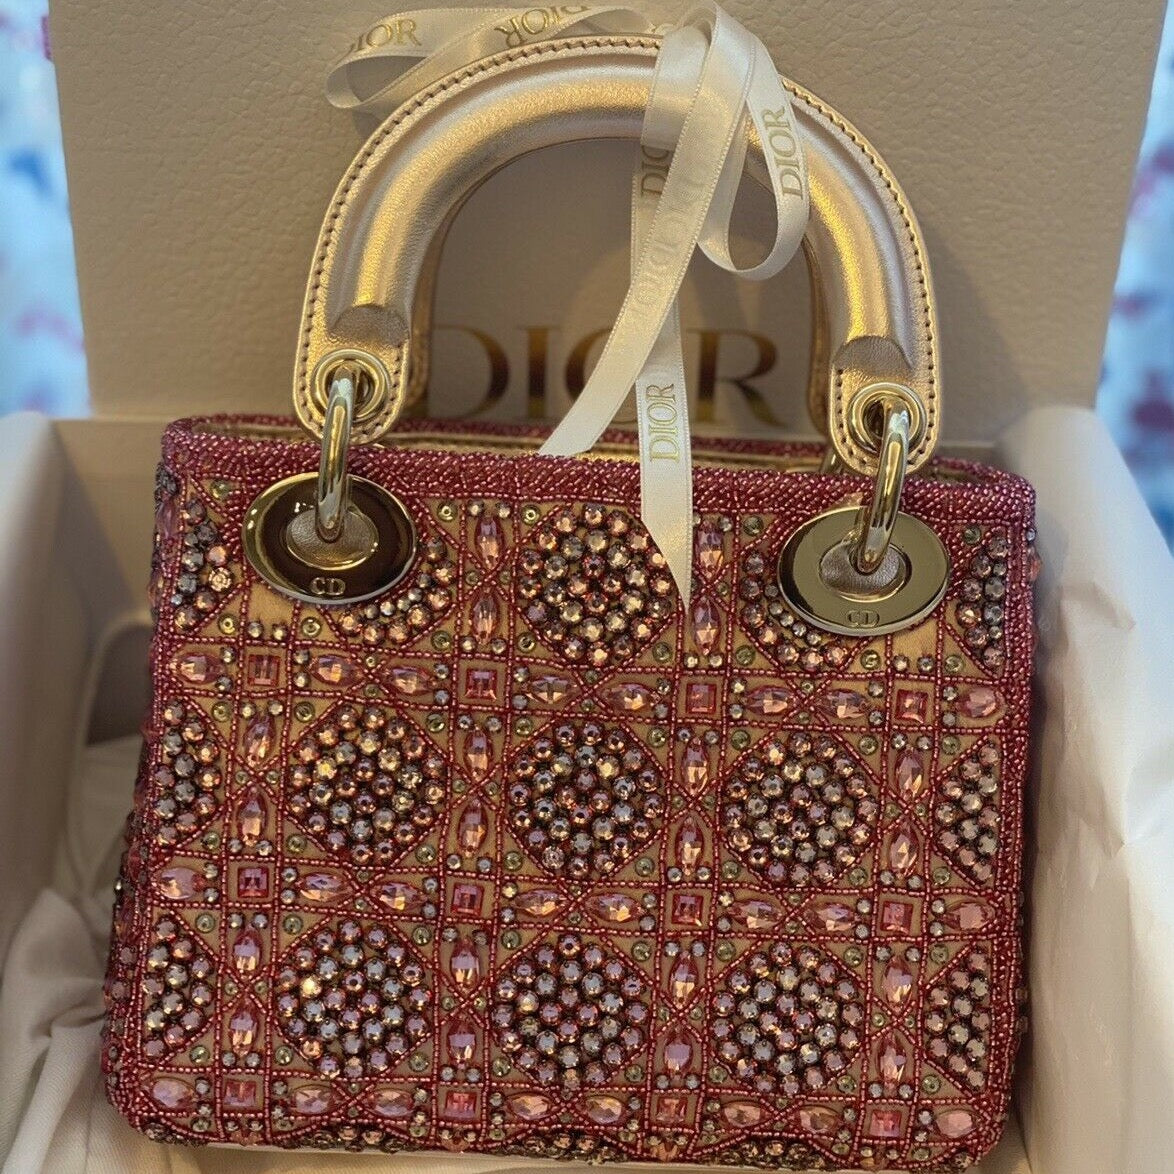 LADY DIOR MINIMetallic Calfskin and Satin with Rose Des Vents Pearl Em –  AuthenticFab